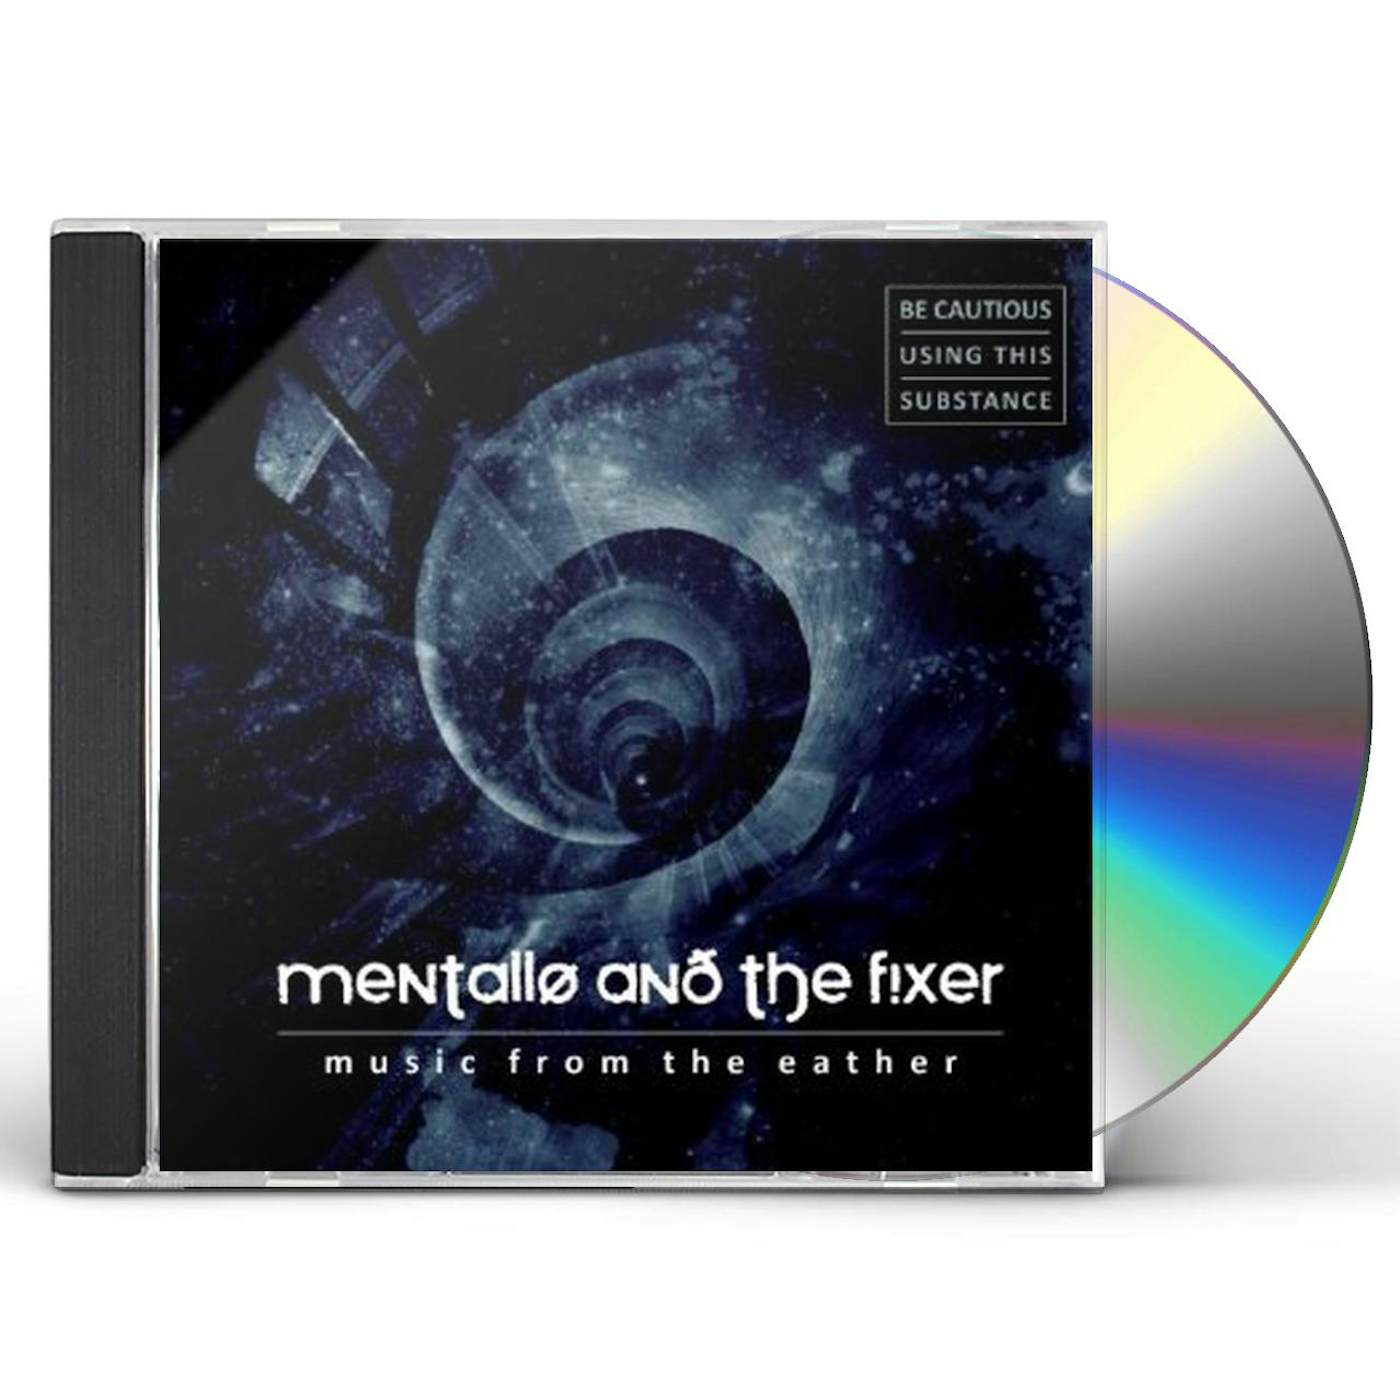 Mentallo & The Fixer MUSIC FROM THE EATHER CD